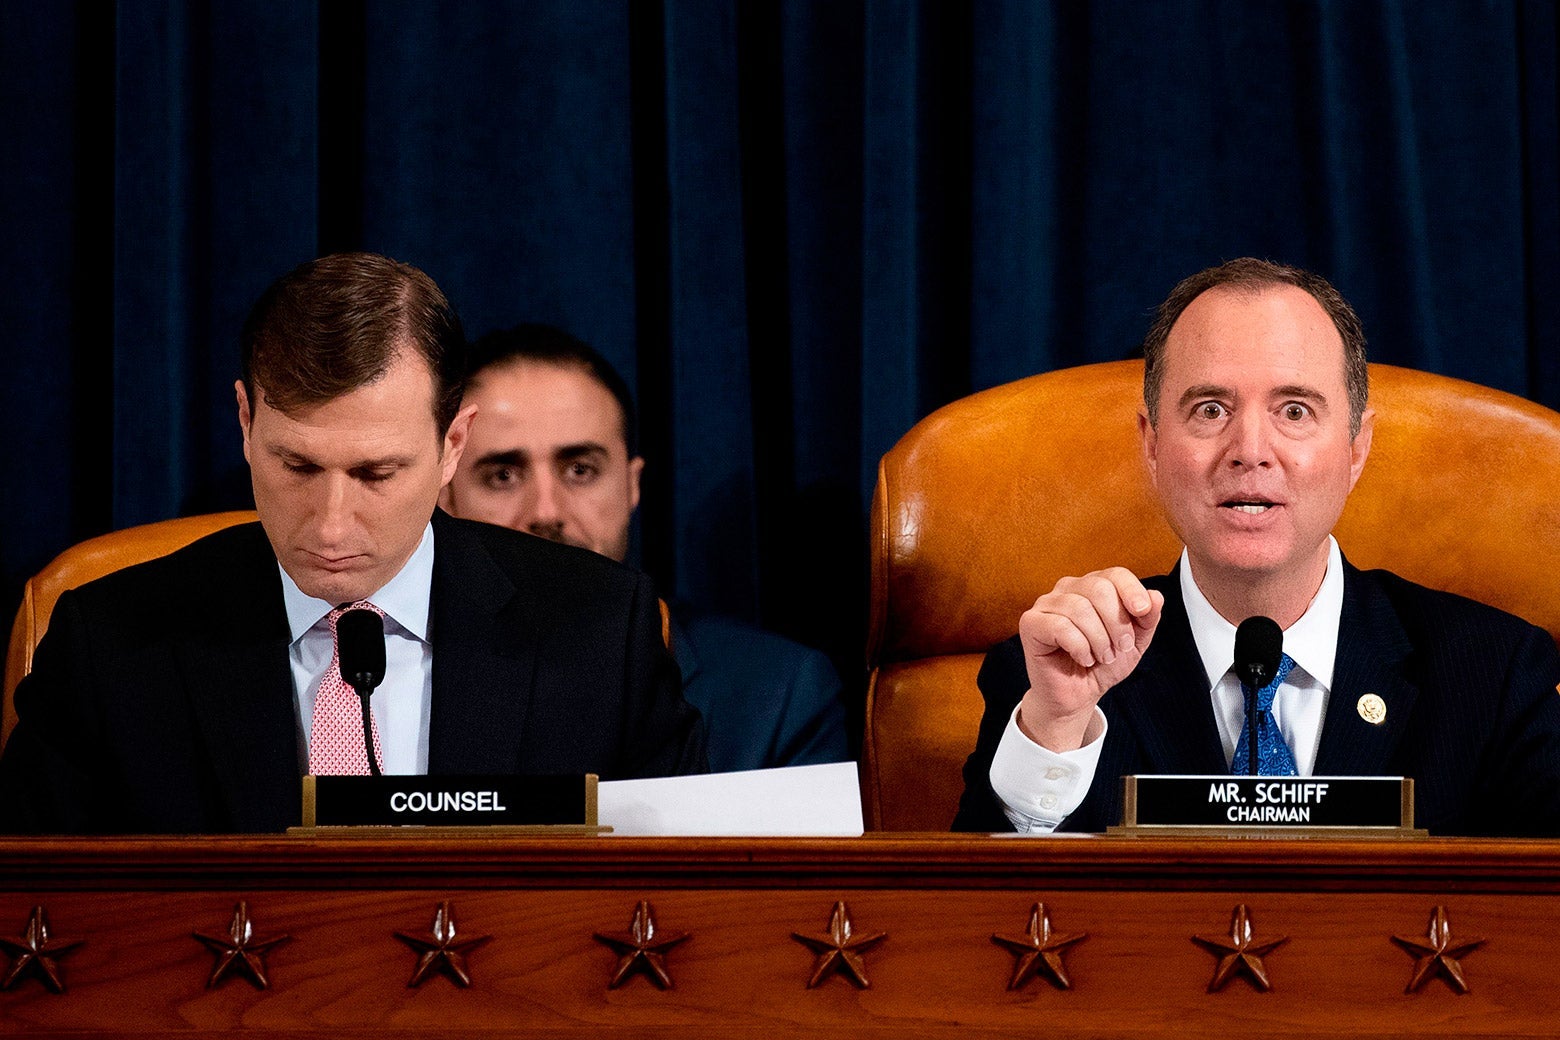 Goldman and Schiff, who is speaking, seated in the hearing room.